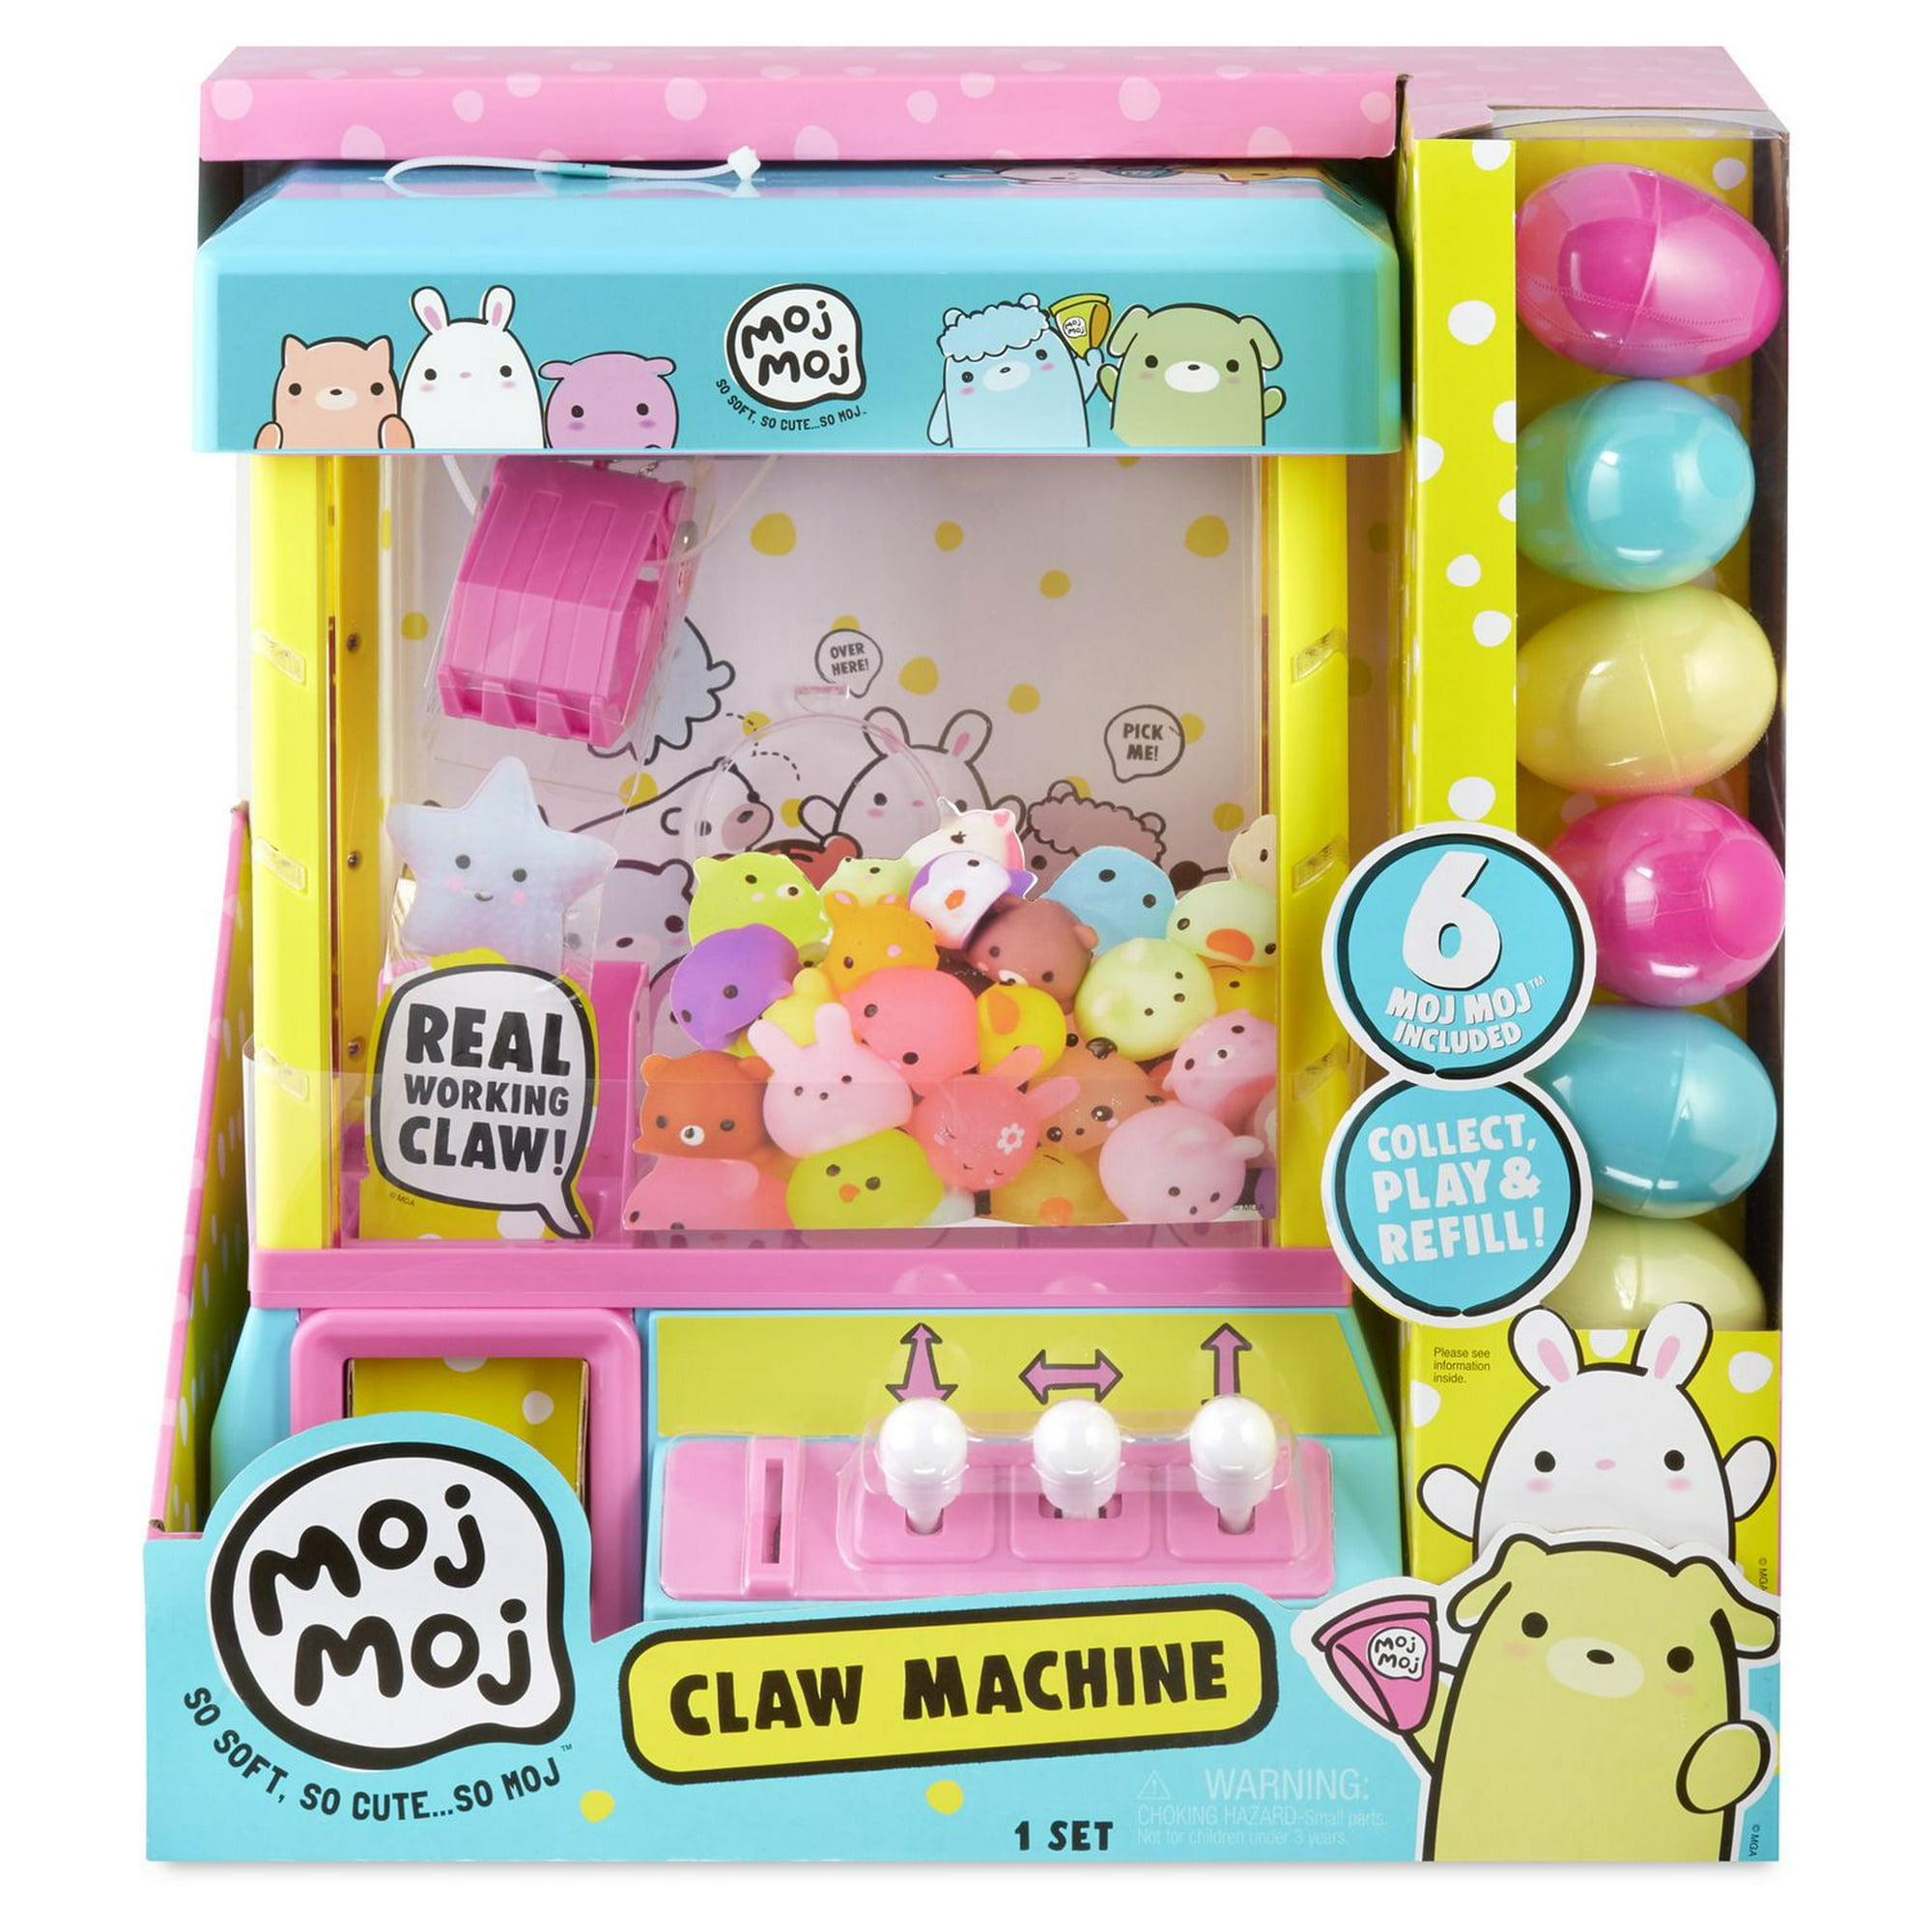 China claw machine maker kit factories - ECER